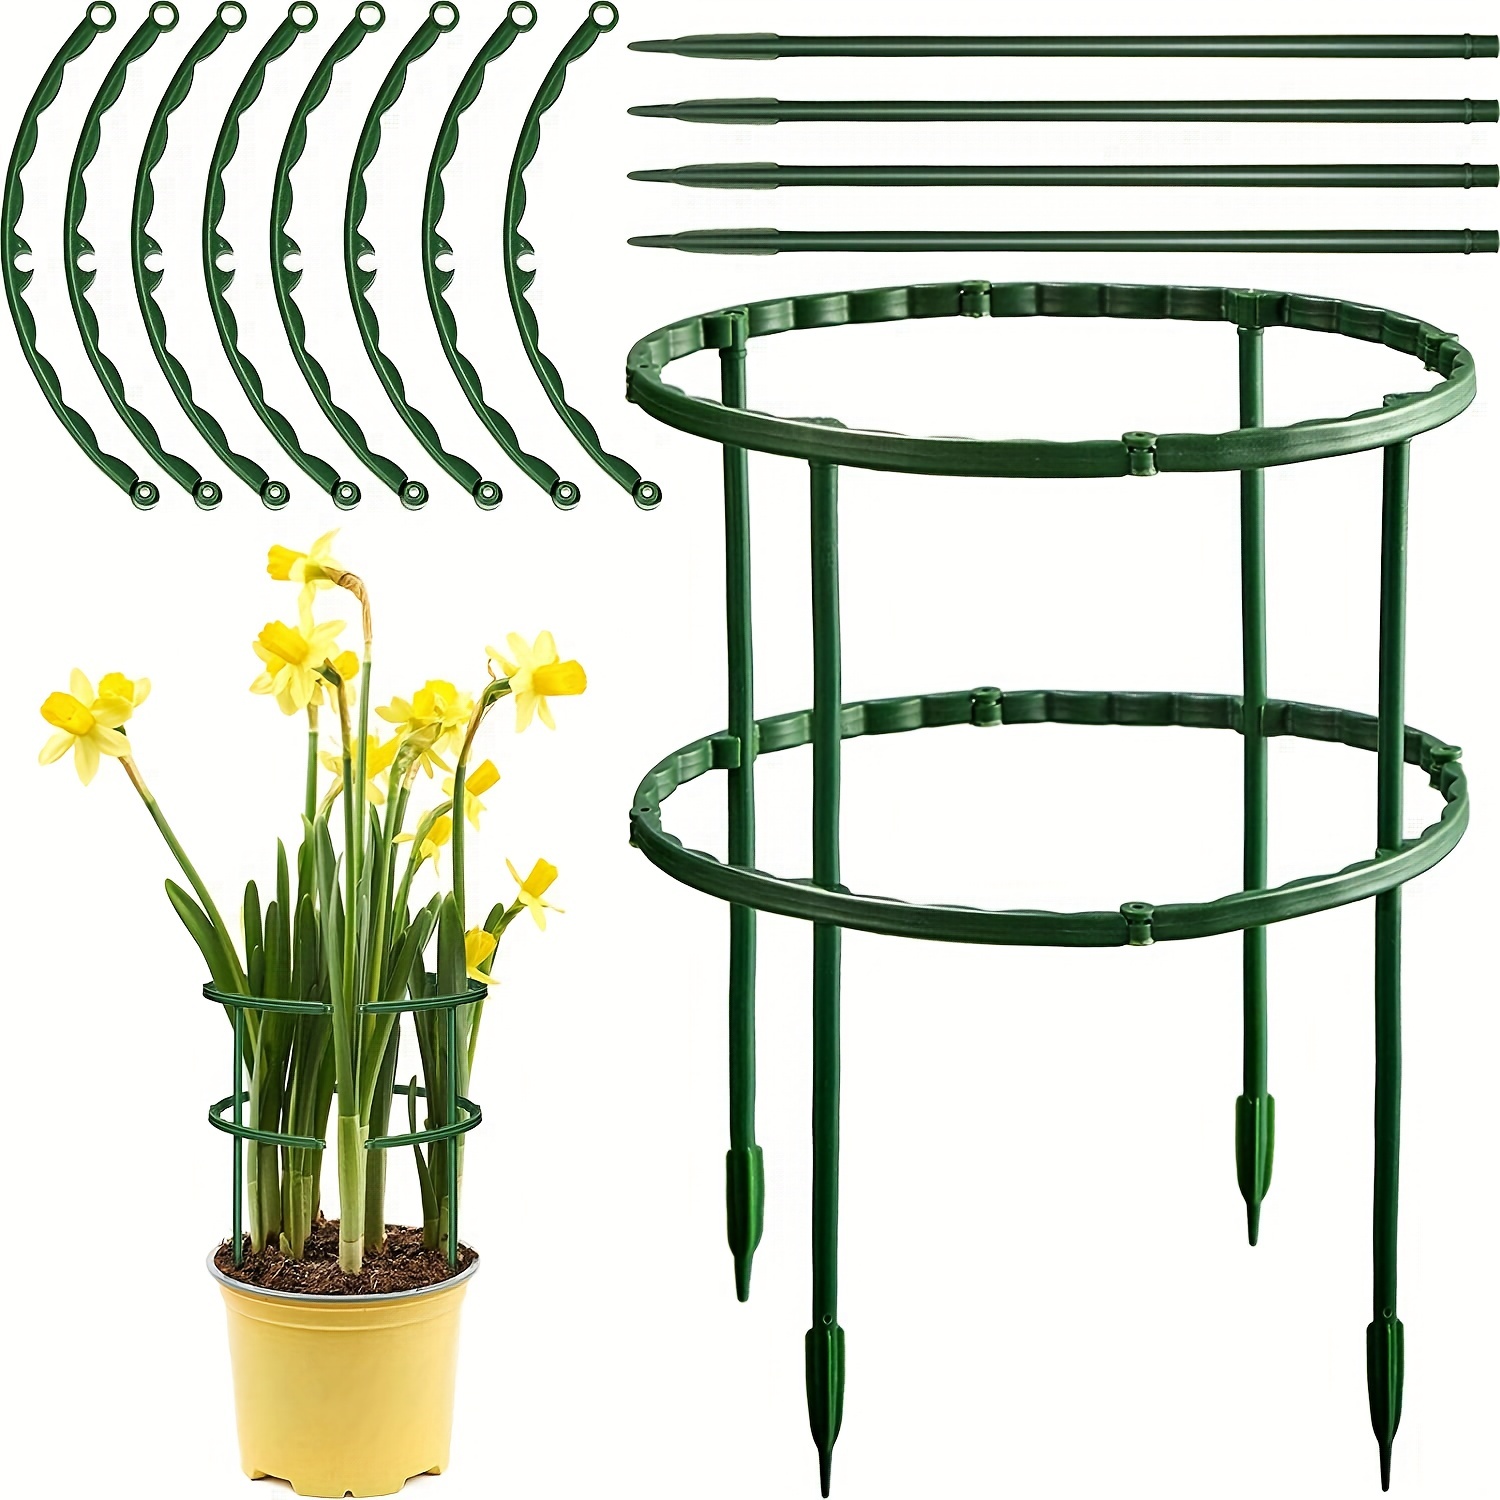 4 pairs plant support stakes peony cages and supports plant supports plant stakes for garden outdoor plants plant cages supports for flower tomato indoor plants half round ring plastic cage holder flower pot climbing trellis for small vegetable